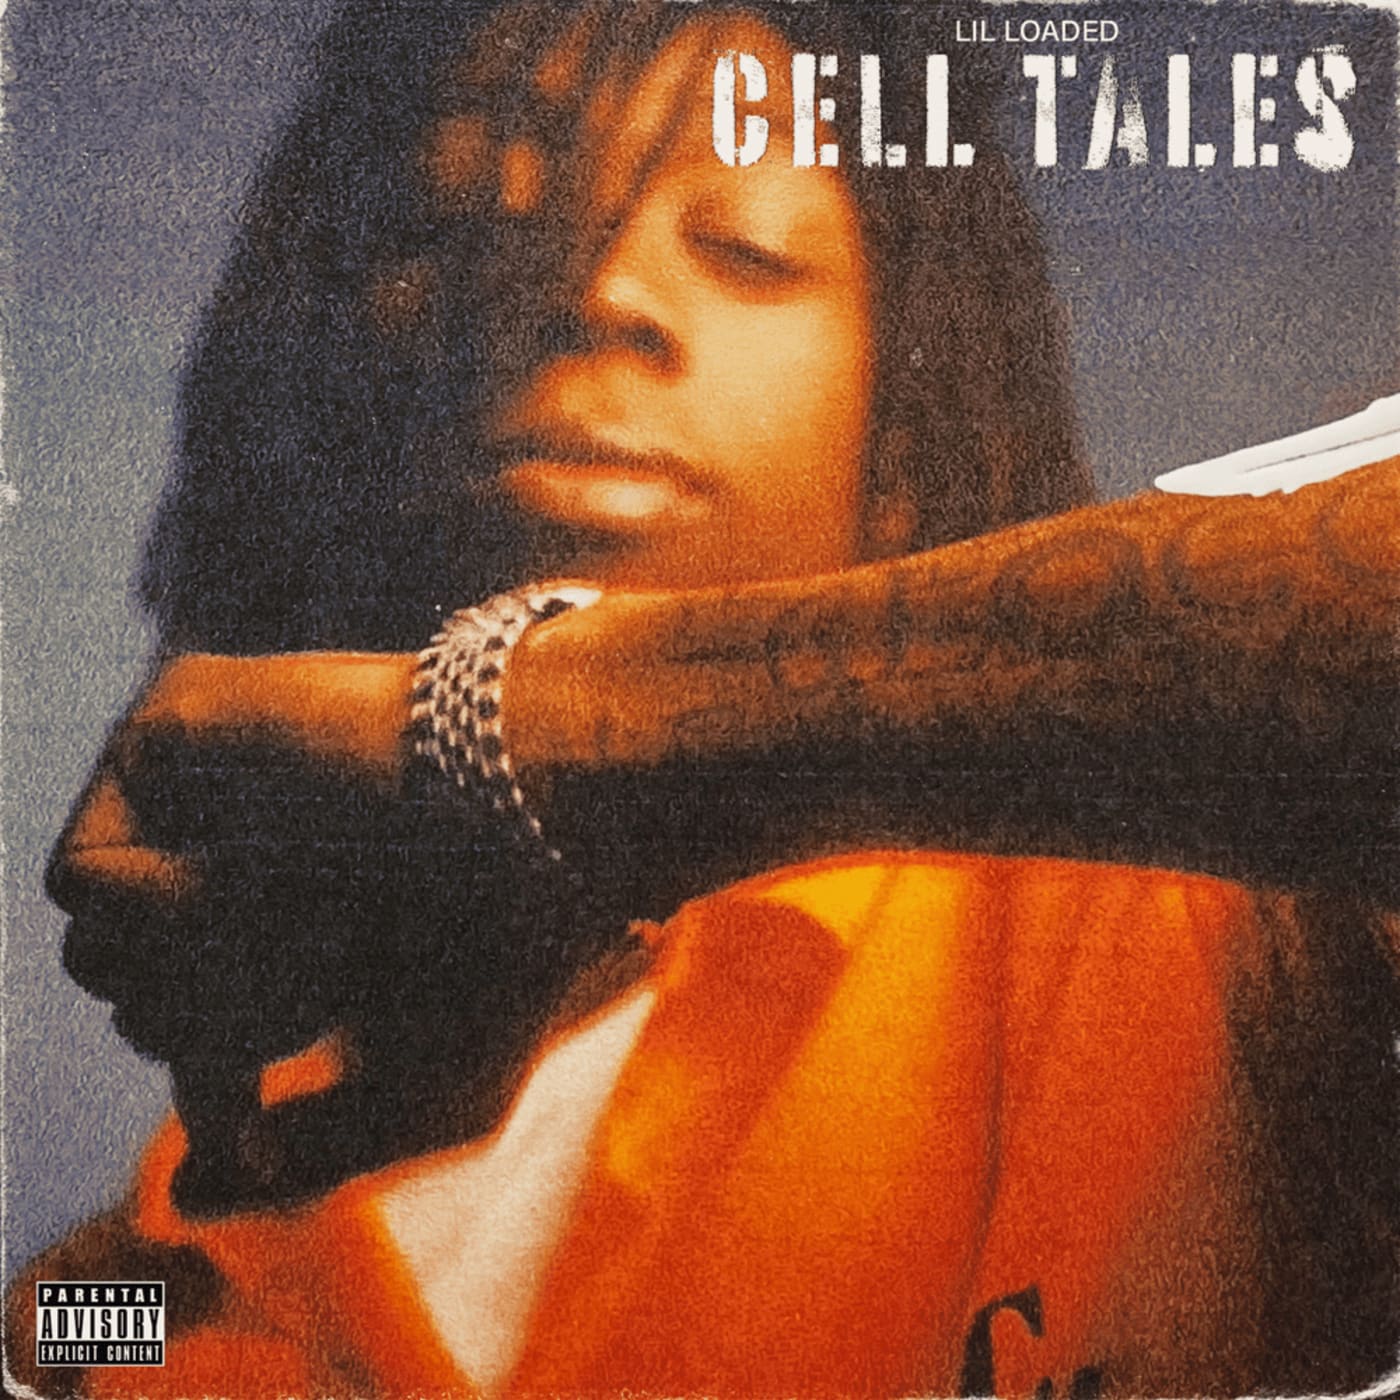 Lil Loaded’s Estate Releases “Cell Tales” On 1 Year Anniversary Of His Death